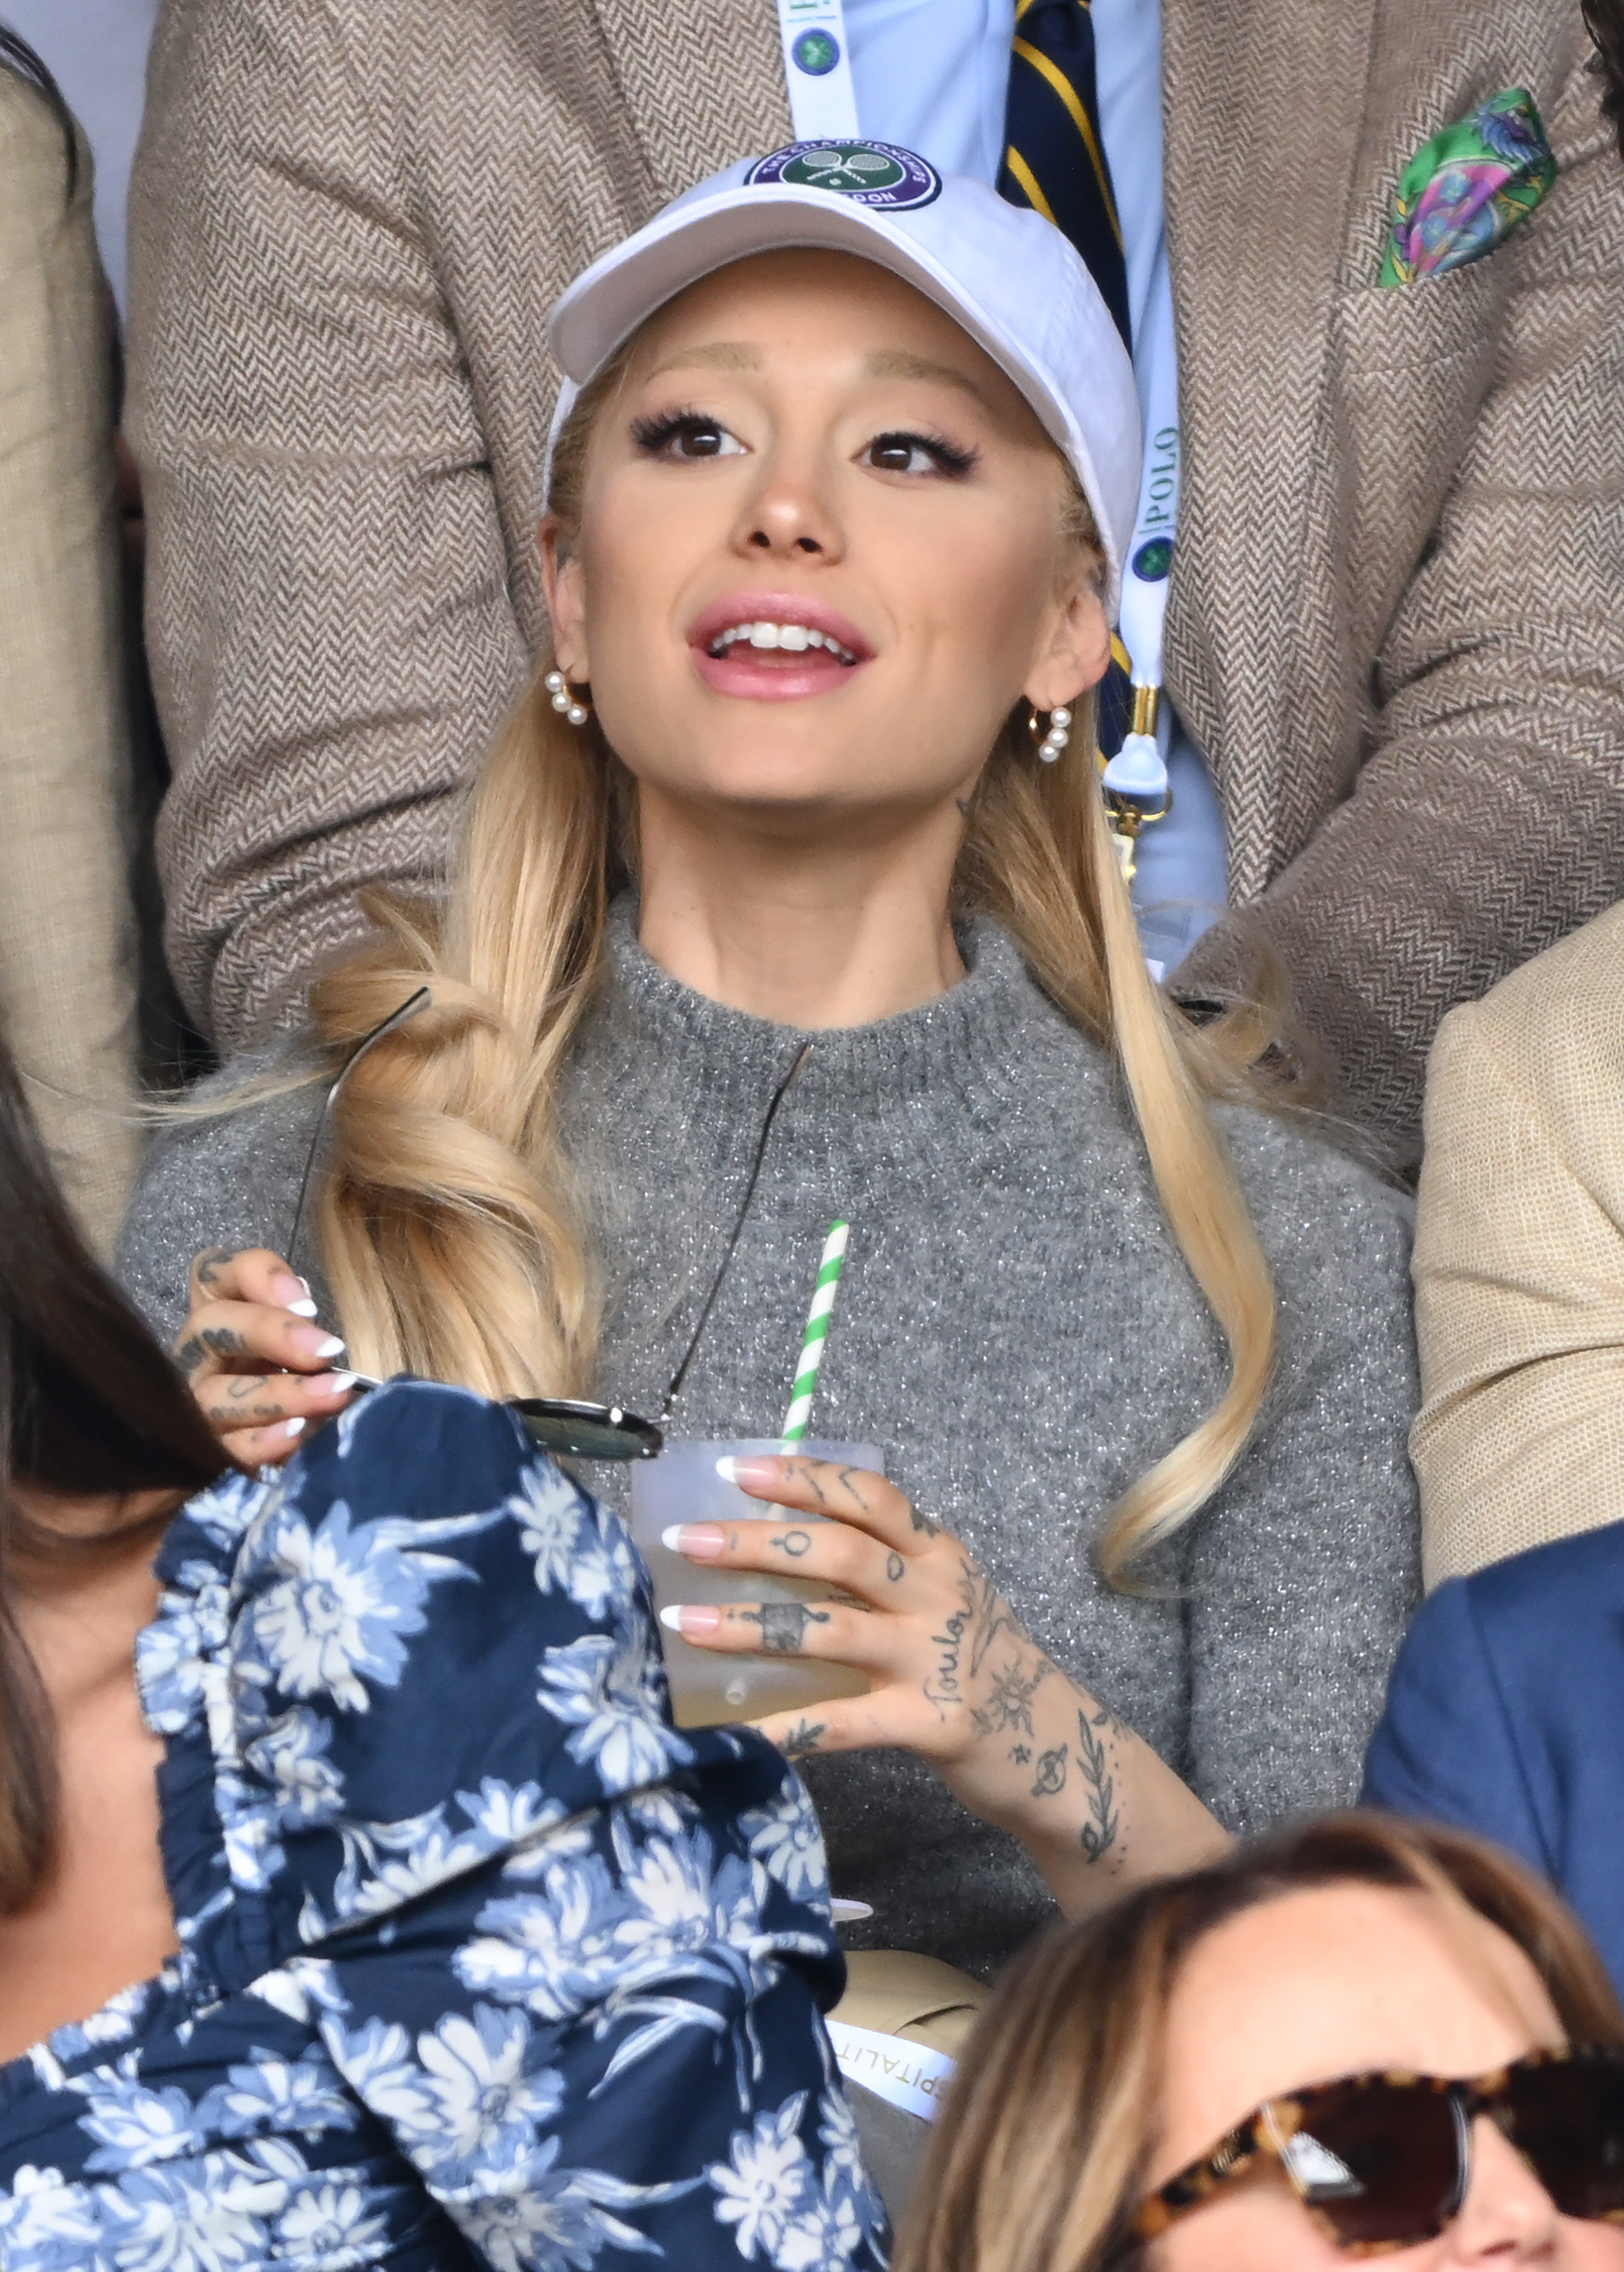 closeup of her at a sports event